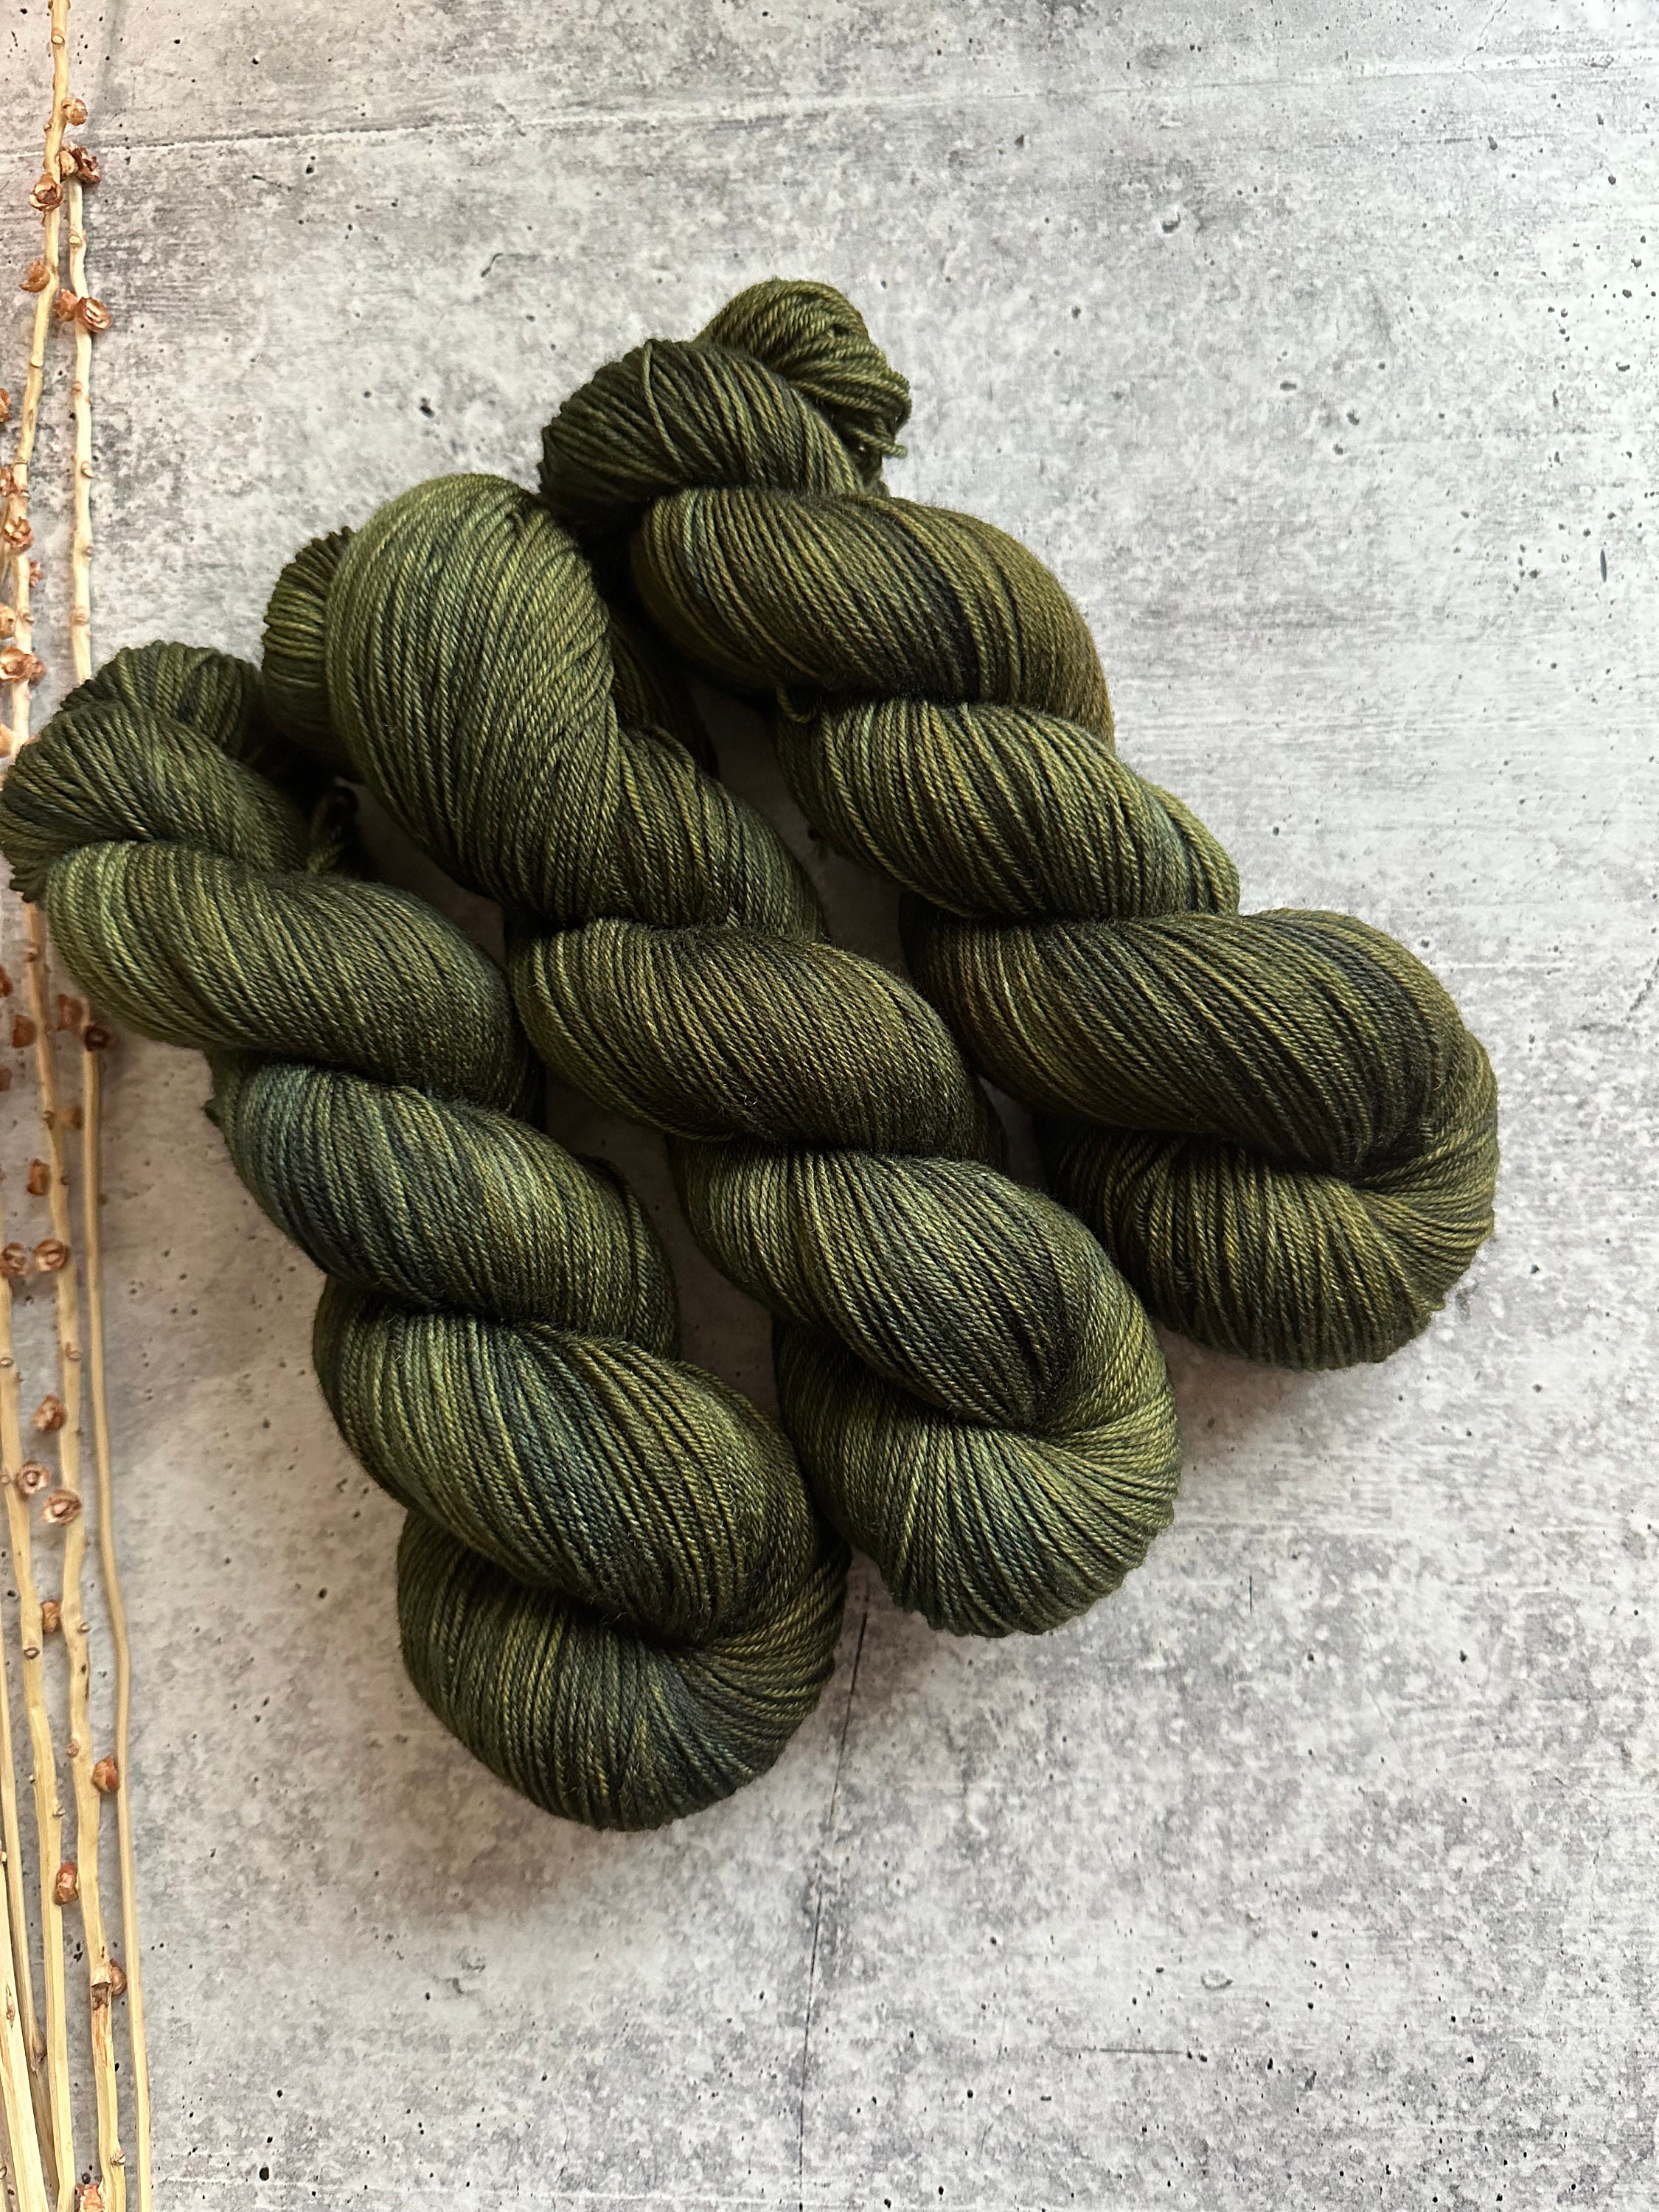 3x50g Beginners Olive Green Yarn, 260 Yards Olive Green Yarn for Crocheting Knitting, Easy-to-See Stitches, Worsted Medium #4, Chunky Thick Cotton